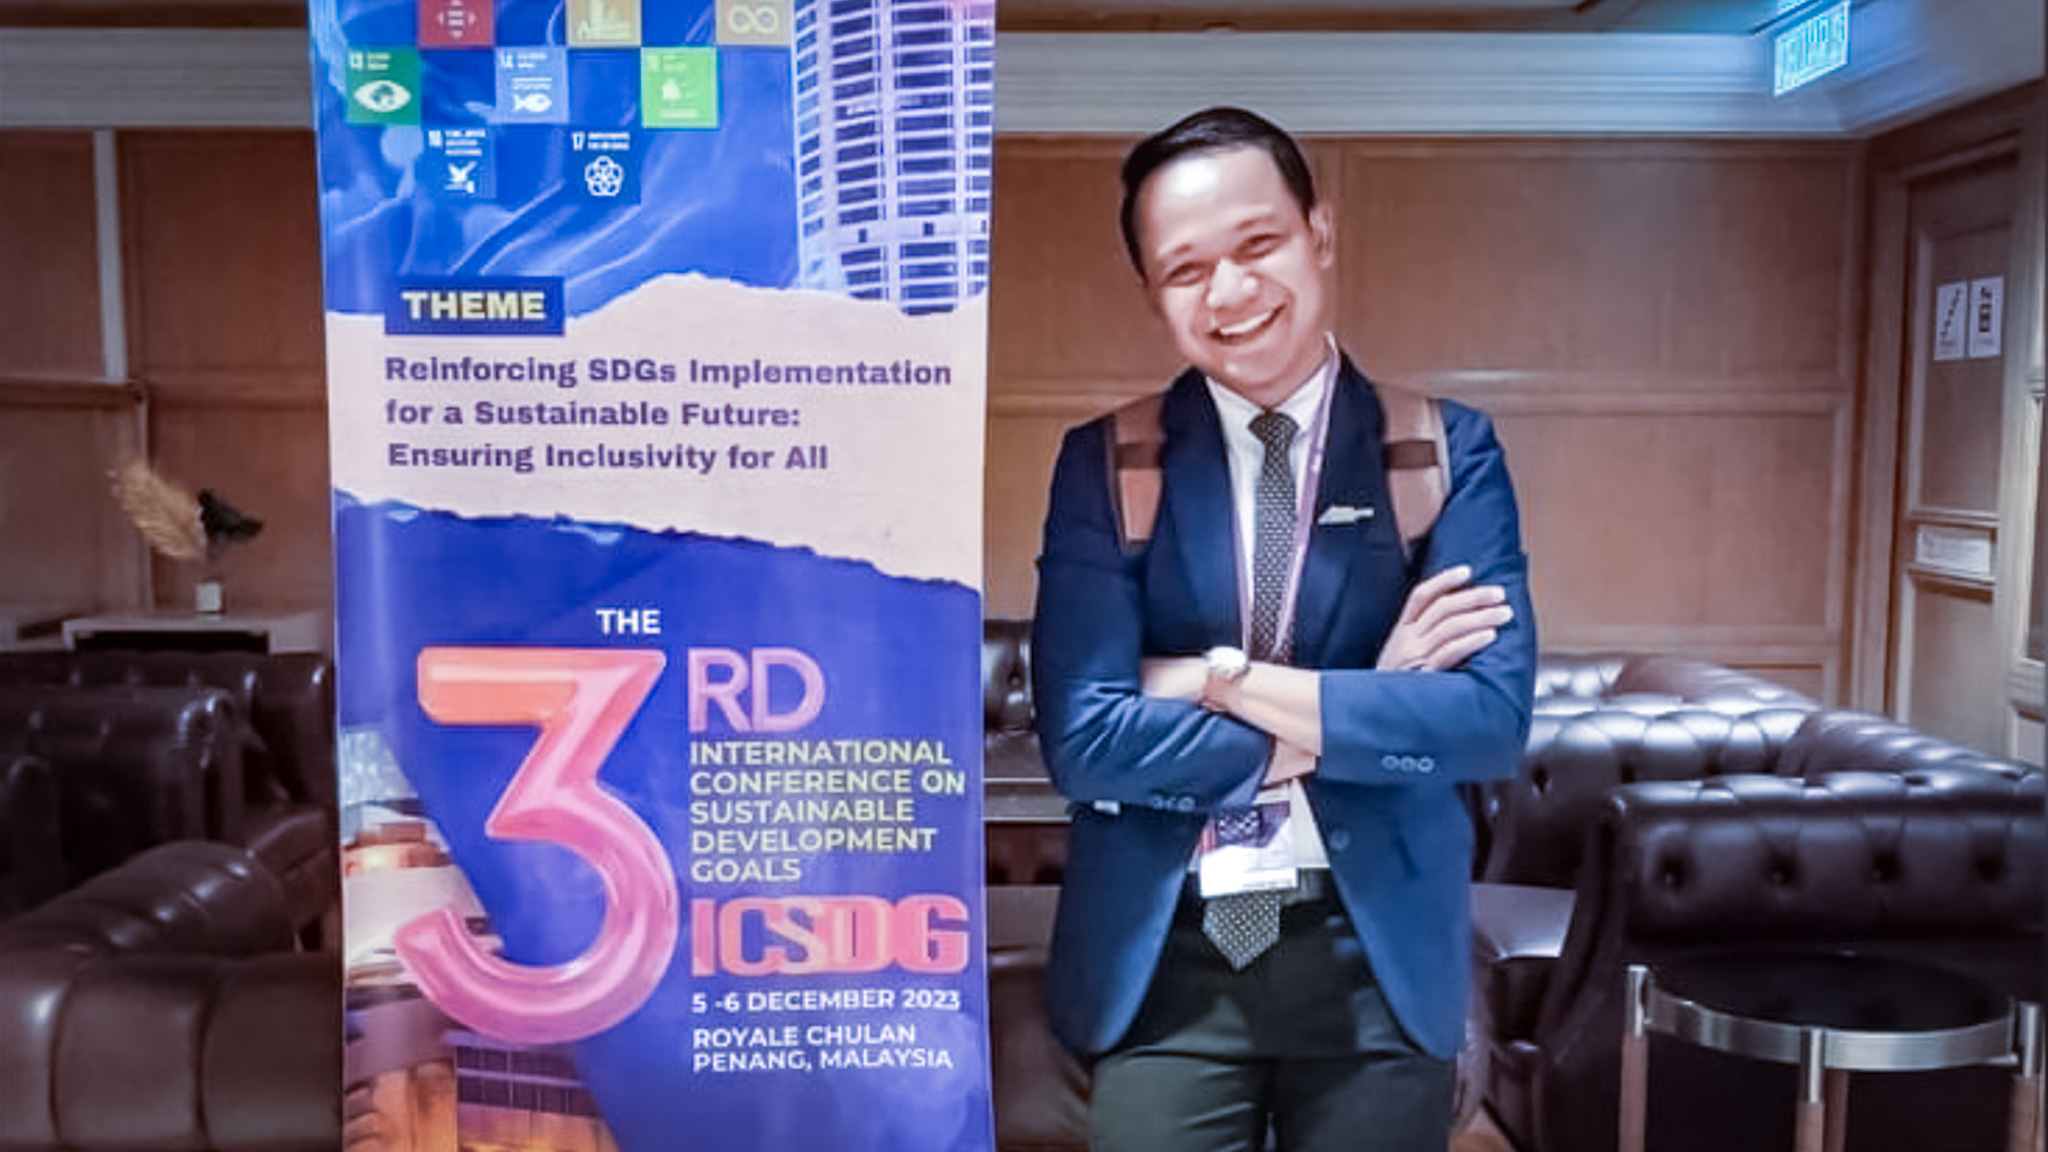 UIII Student Addresses Financial Inclusion at SDGs Forum in Malaysia